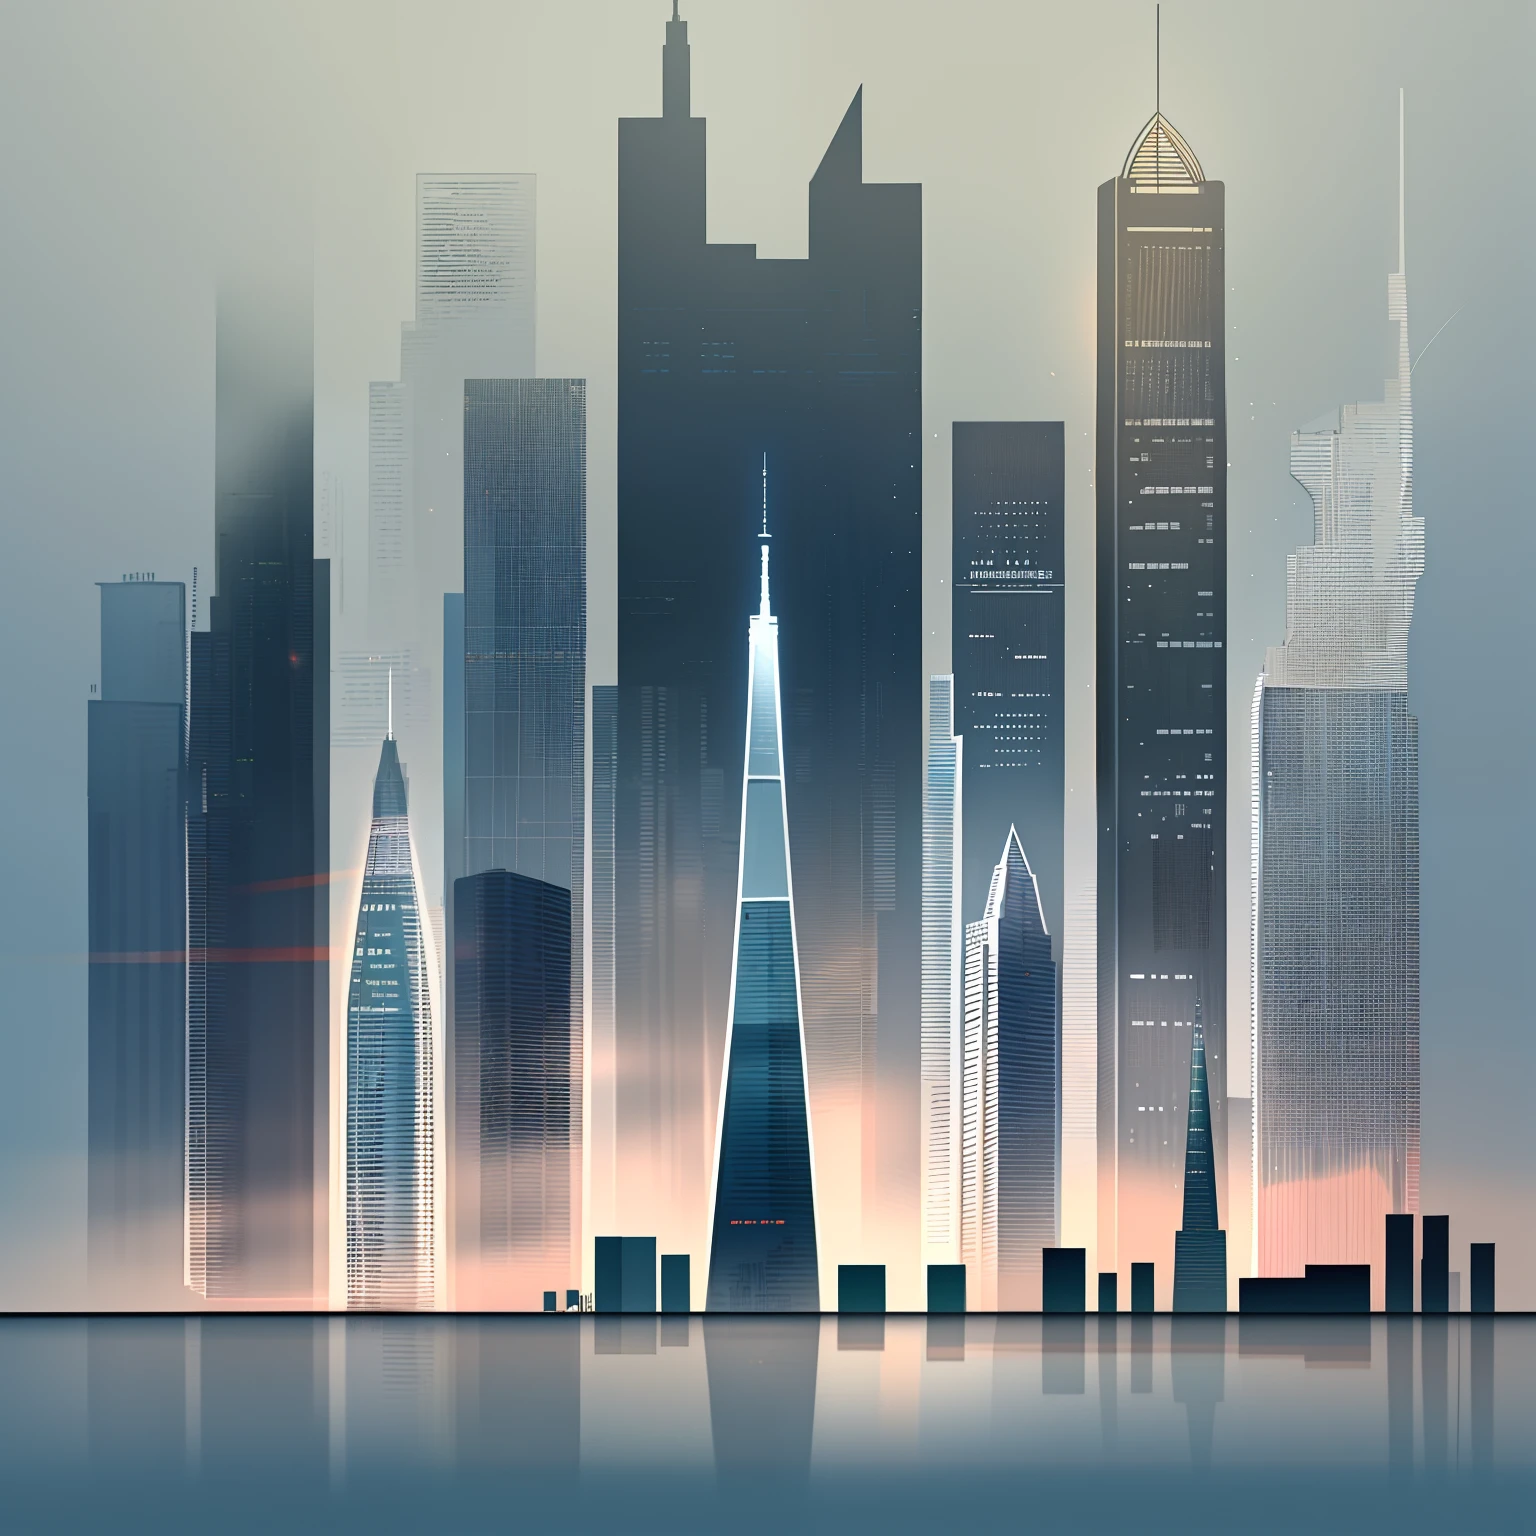 Illustration in urbanist technical style, scale of a city, Tall ism-skyscraper, urban in the background, urban skyline,  empire,, skyline showing,